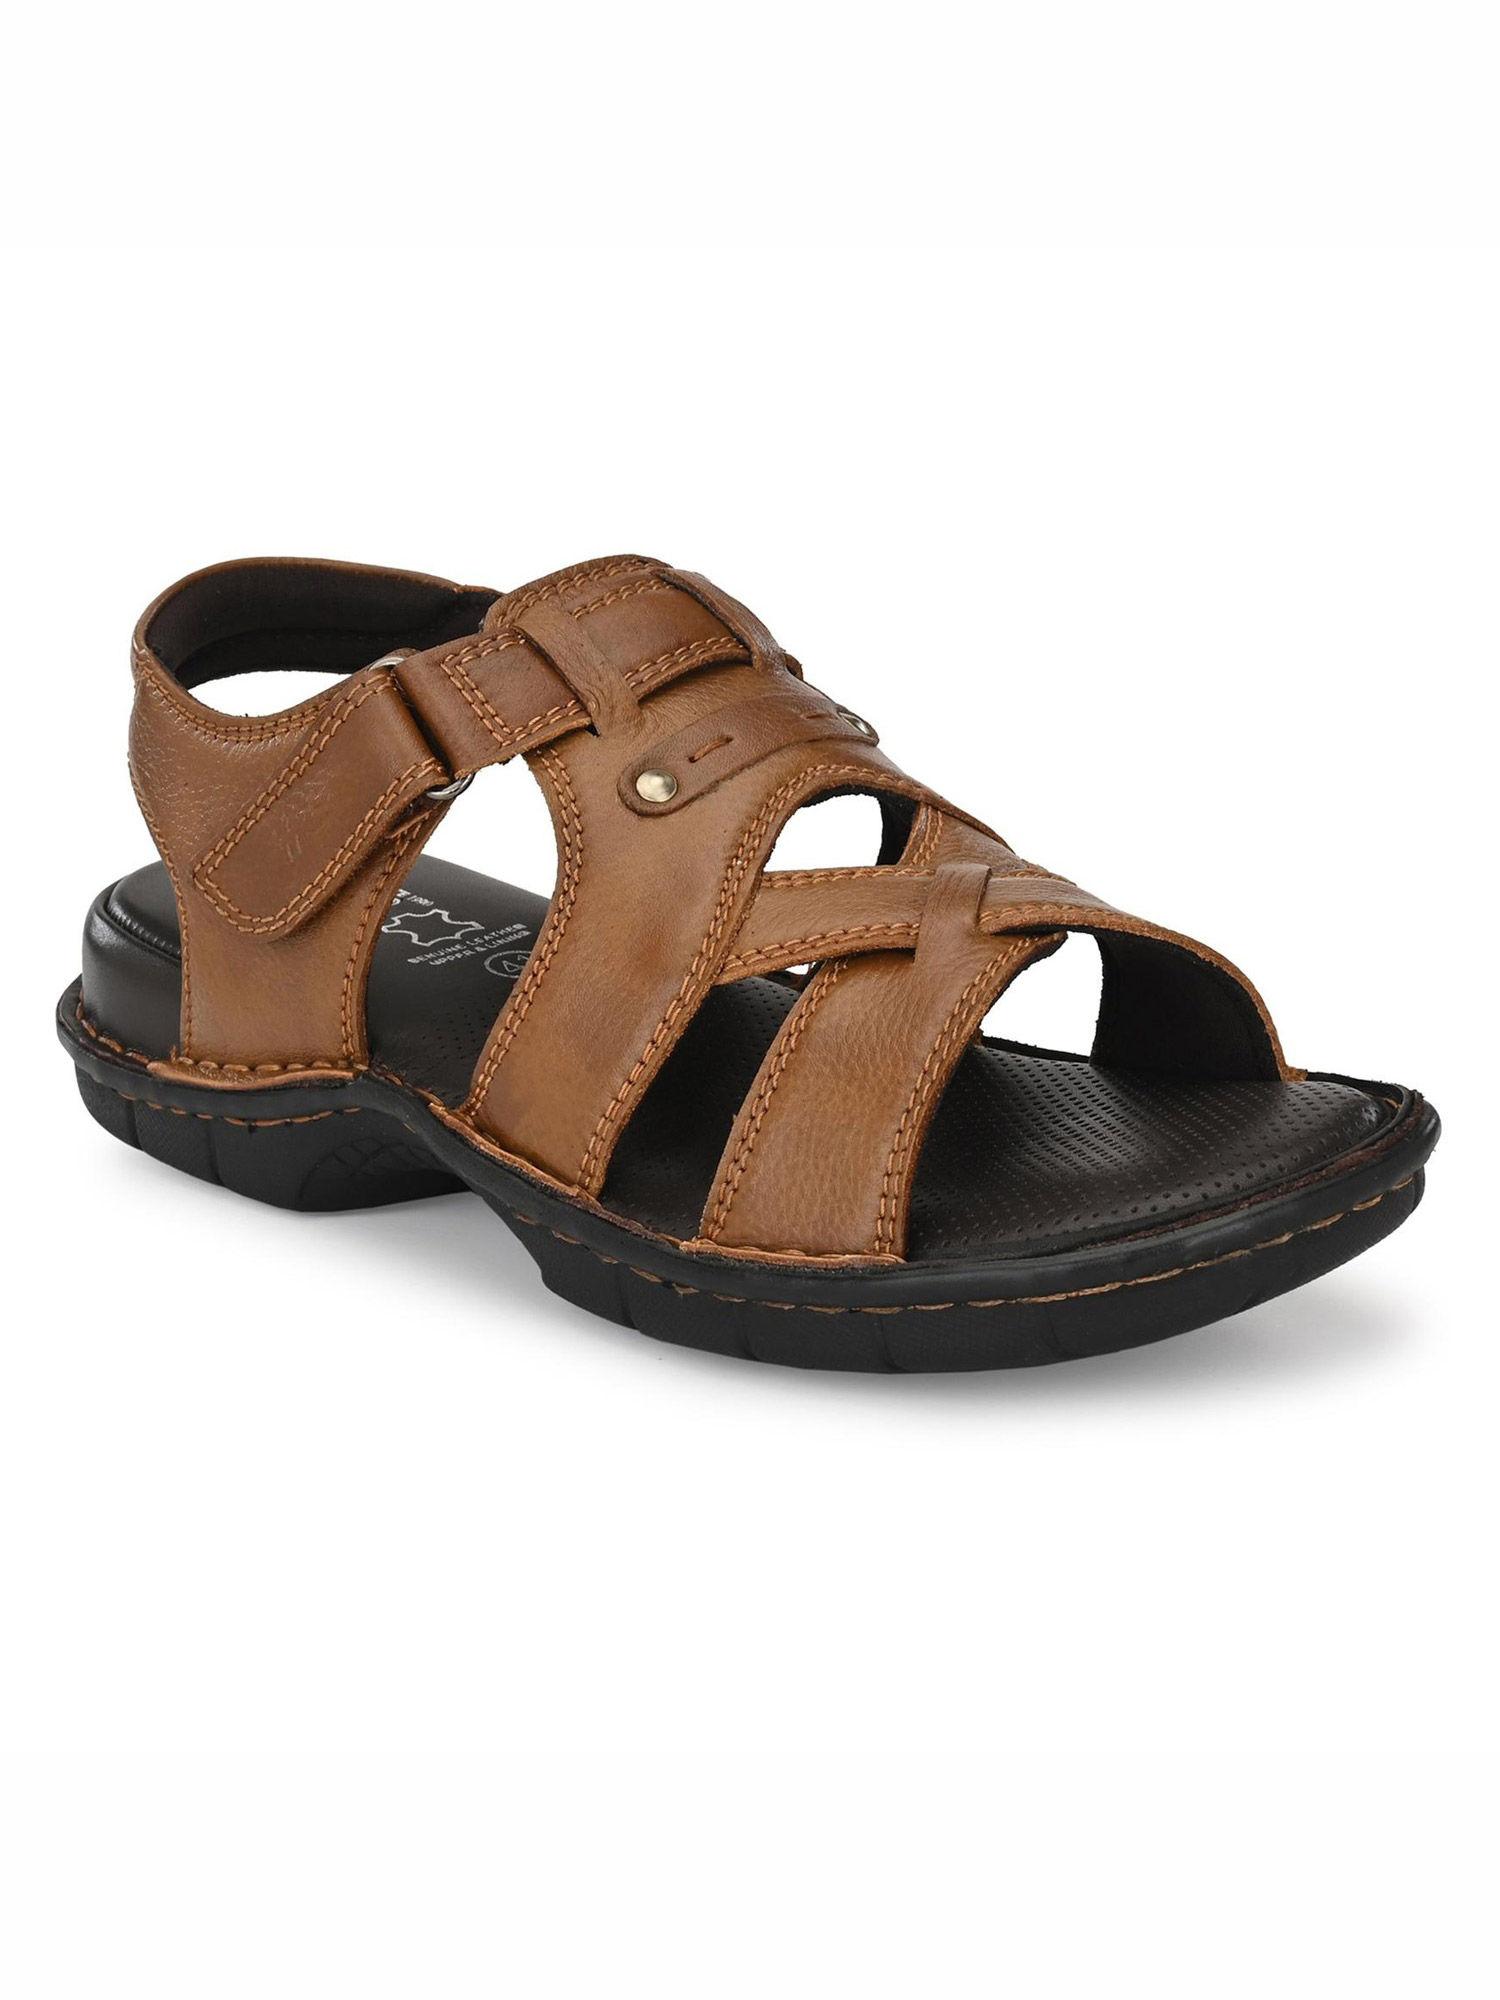 men's tan leather open toe sandals with velcro closure